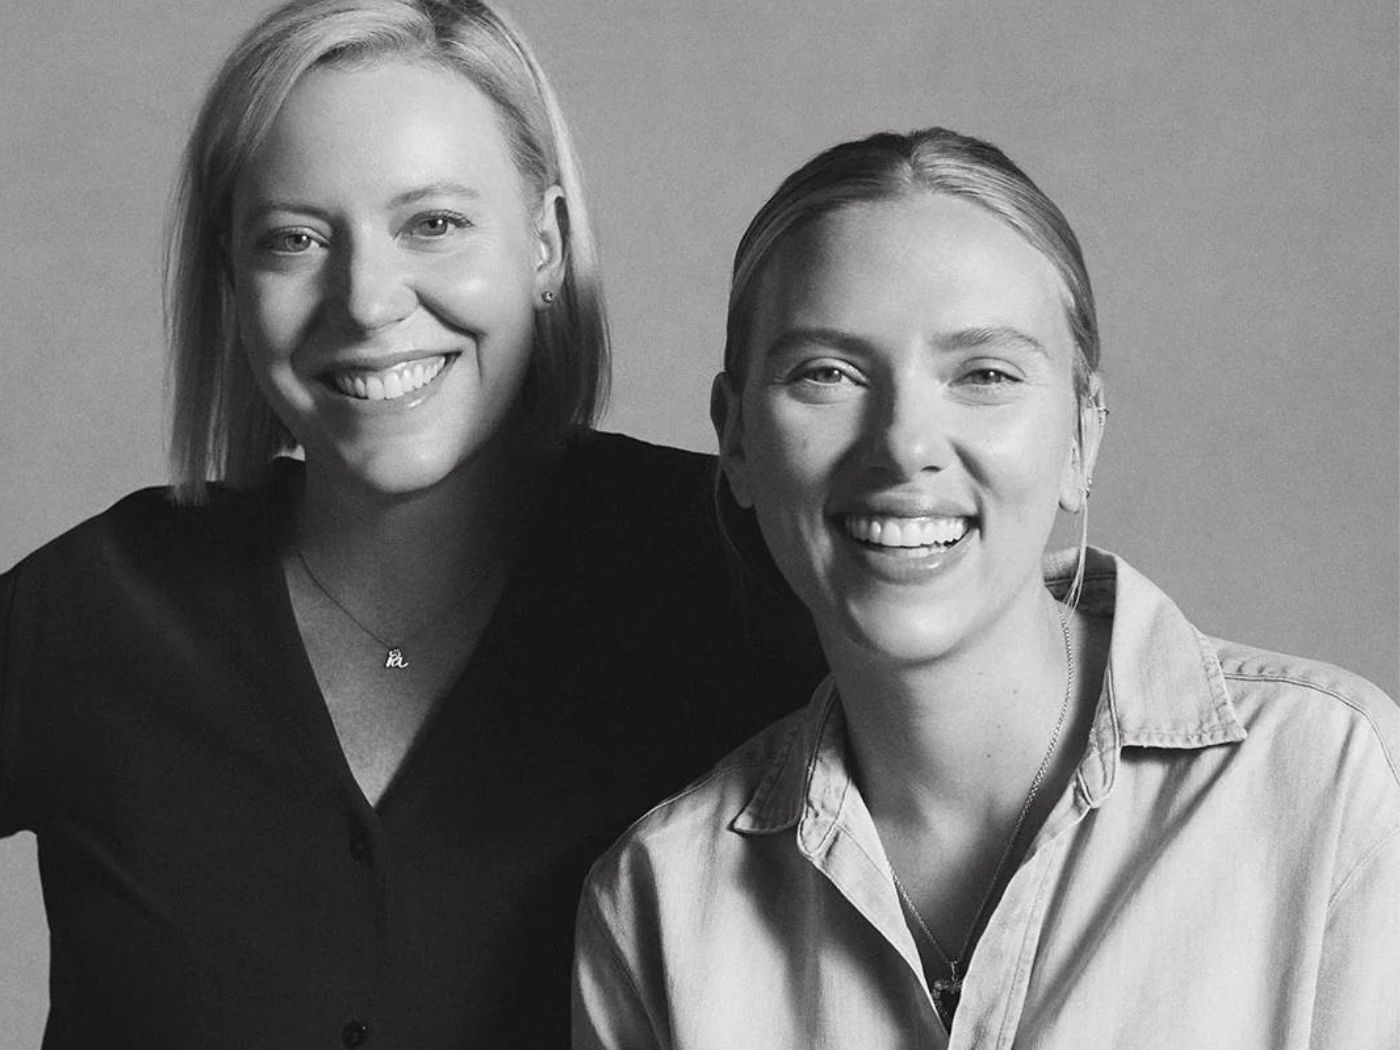 Black and white portrait of two women, one in a black shirt and one in a white shirt, smiling.